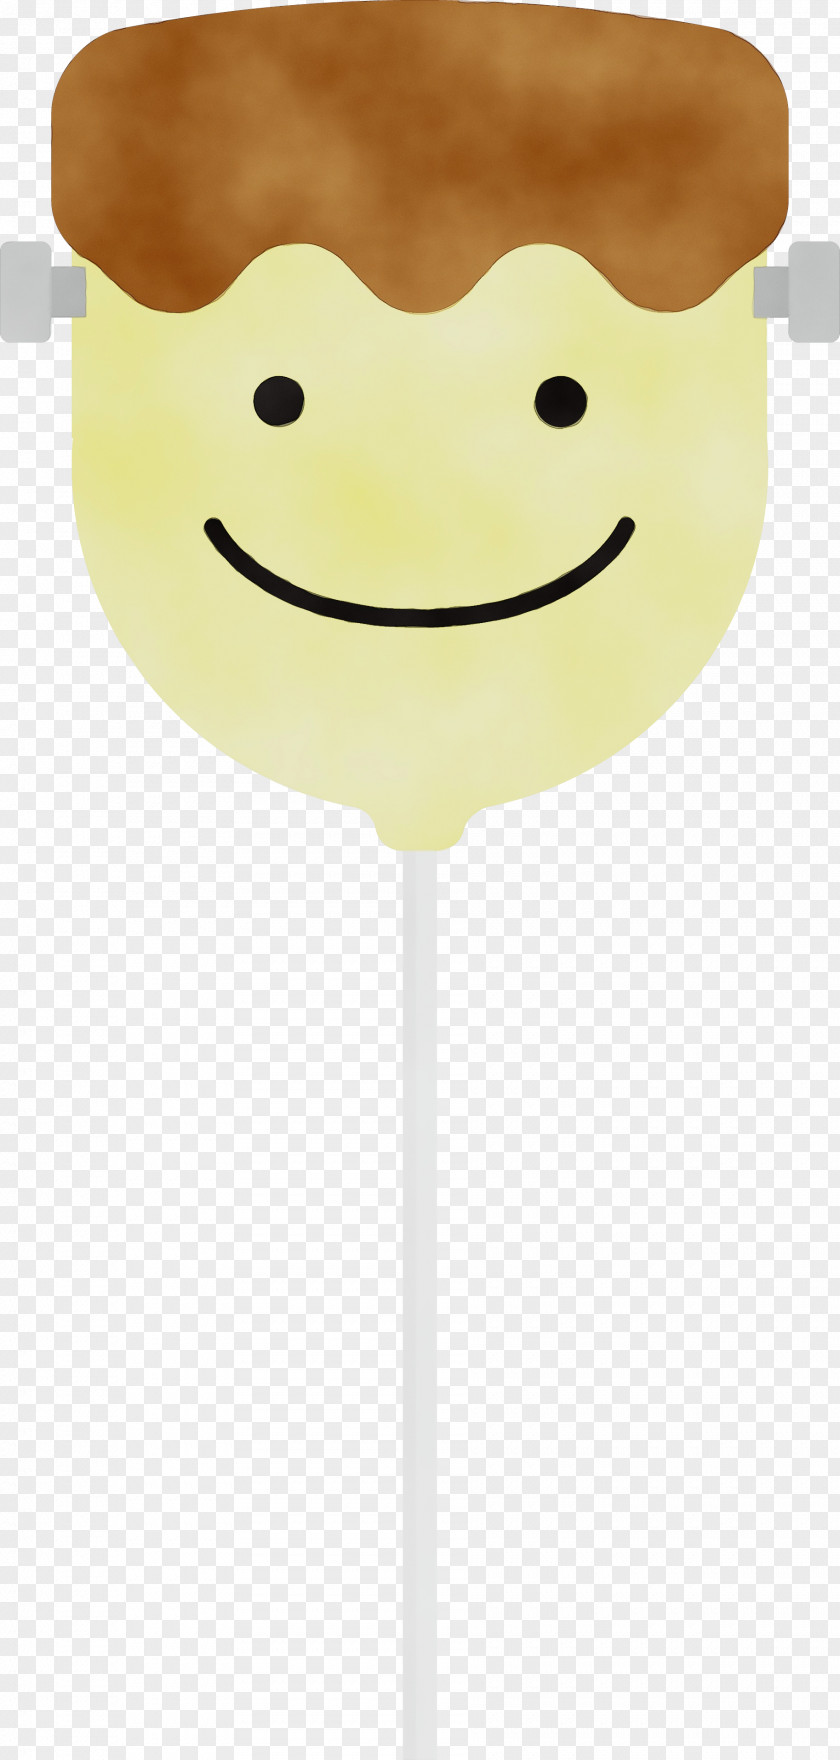 Smiley Yellow Cartoon Science Biology PNG